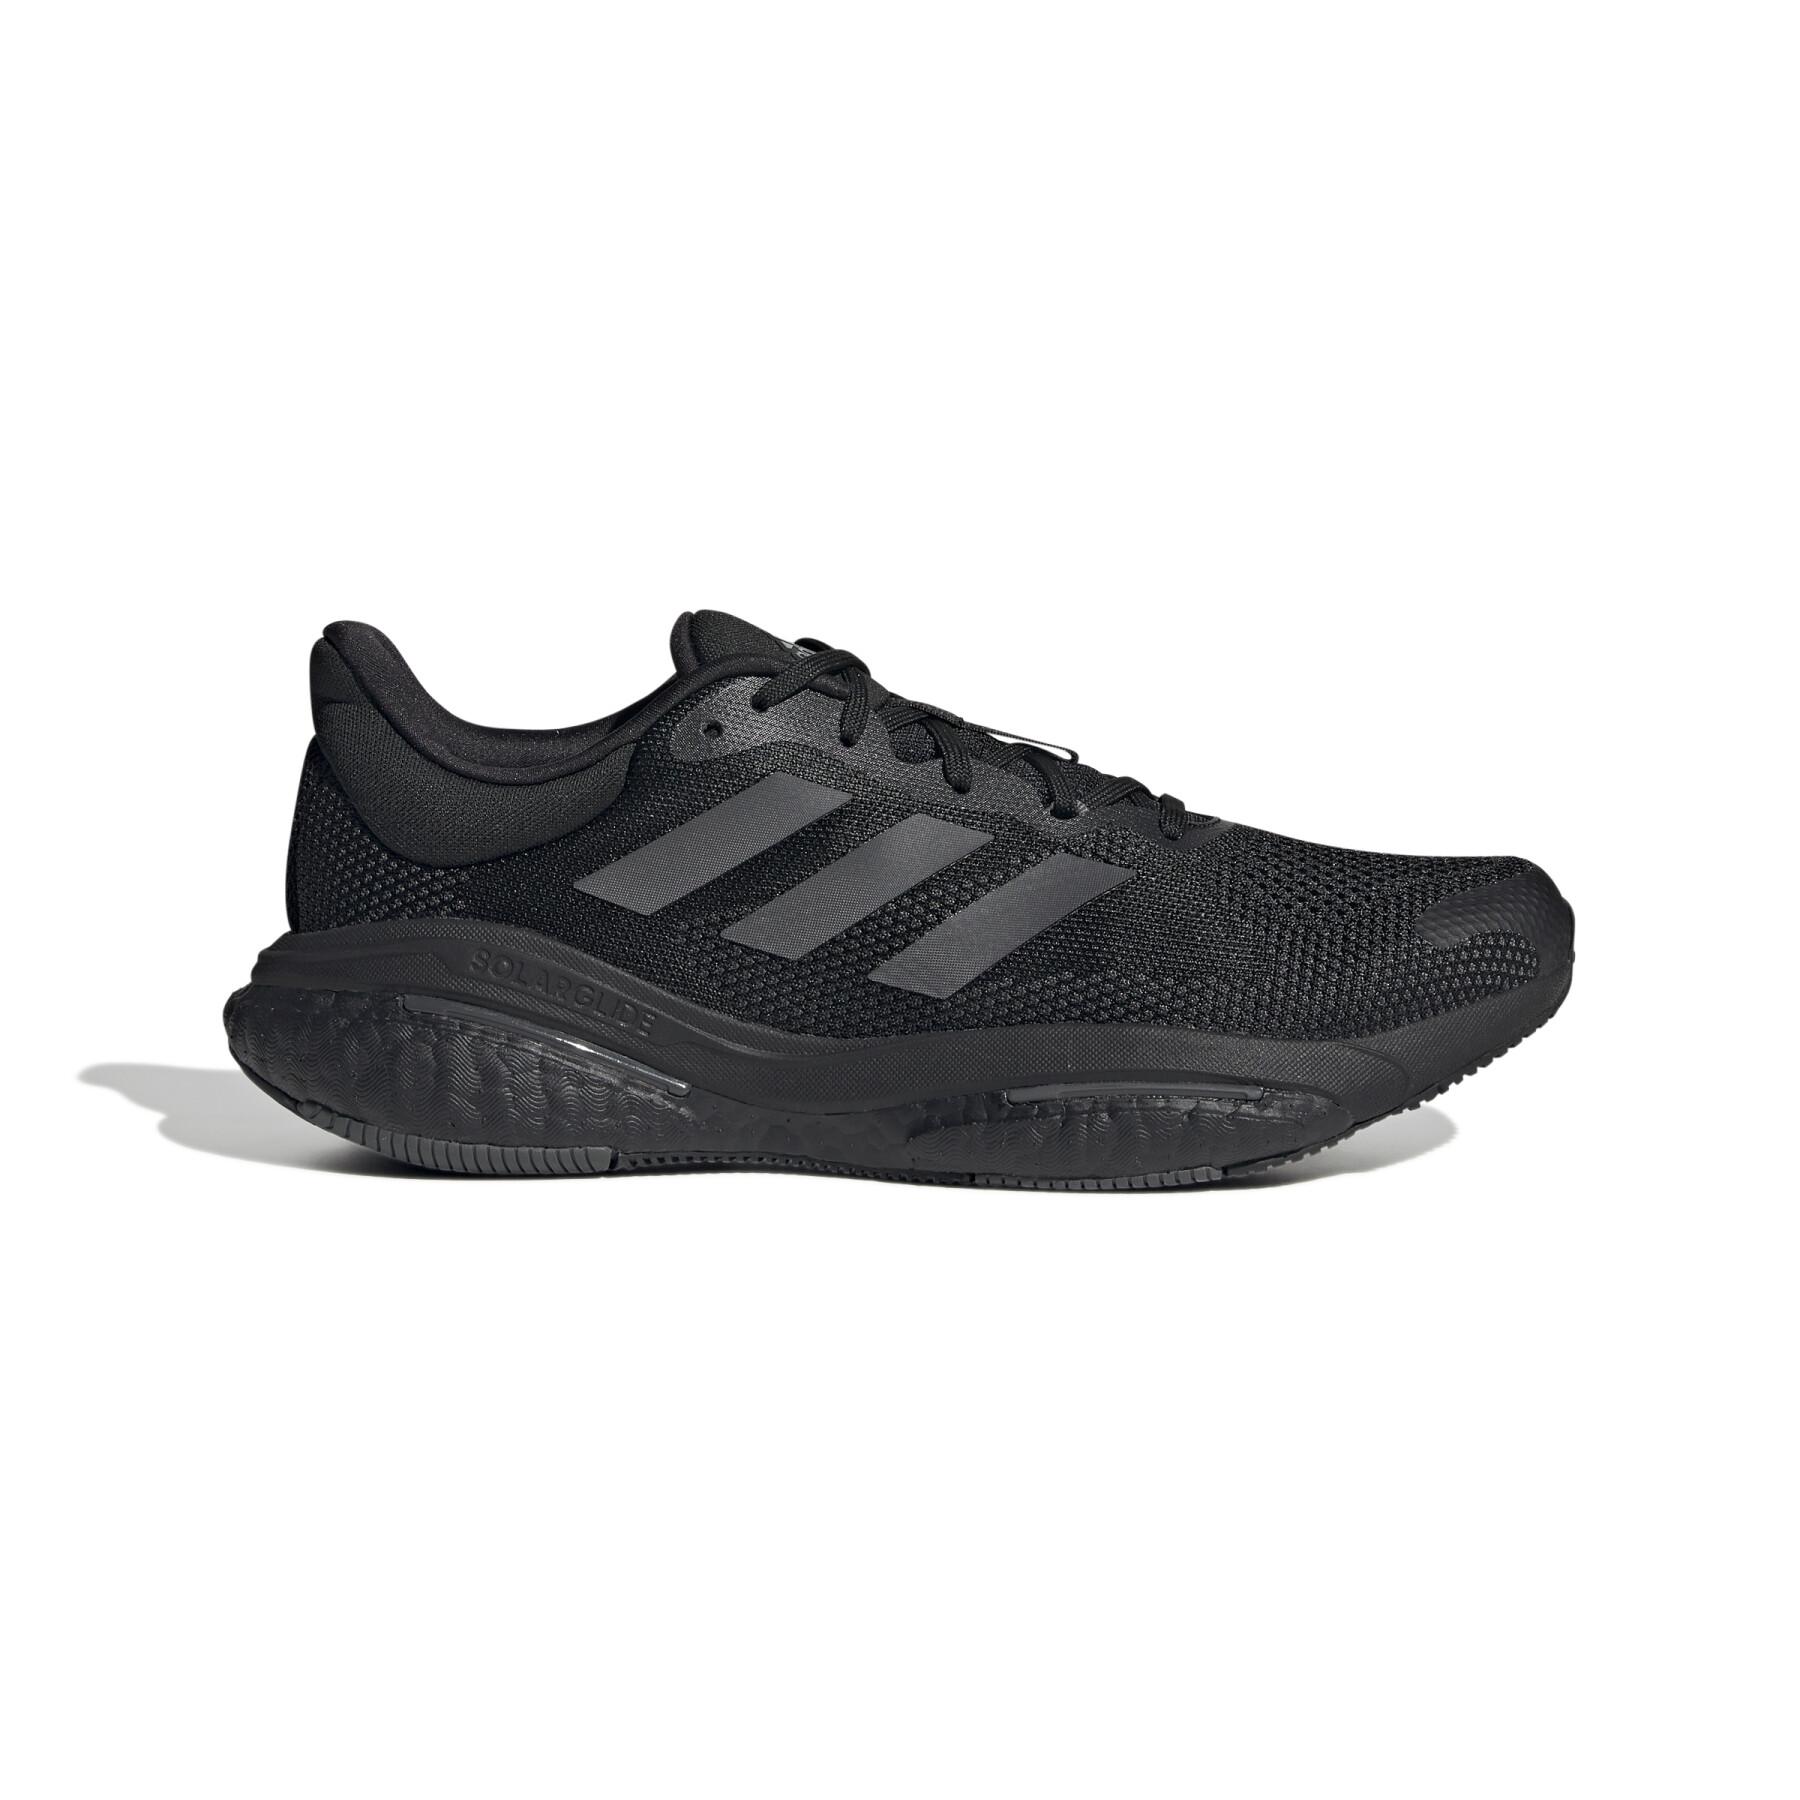 Running shoes adidas Solarglide 5